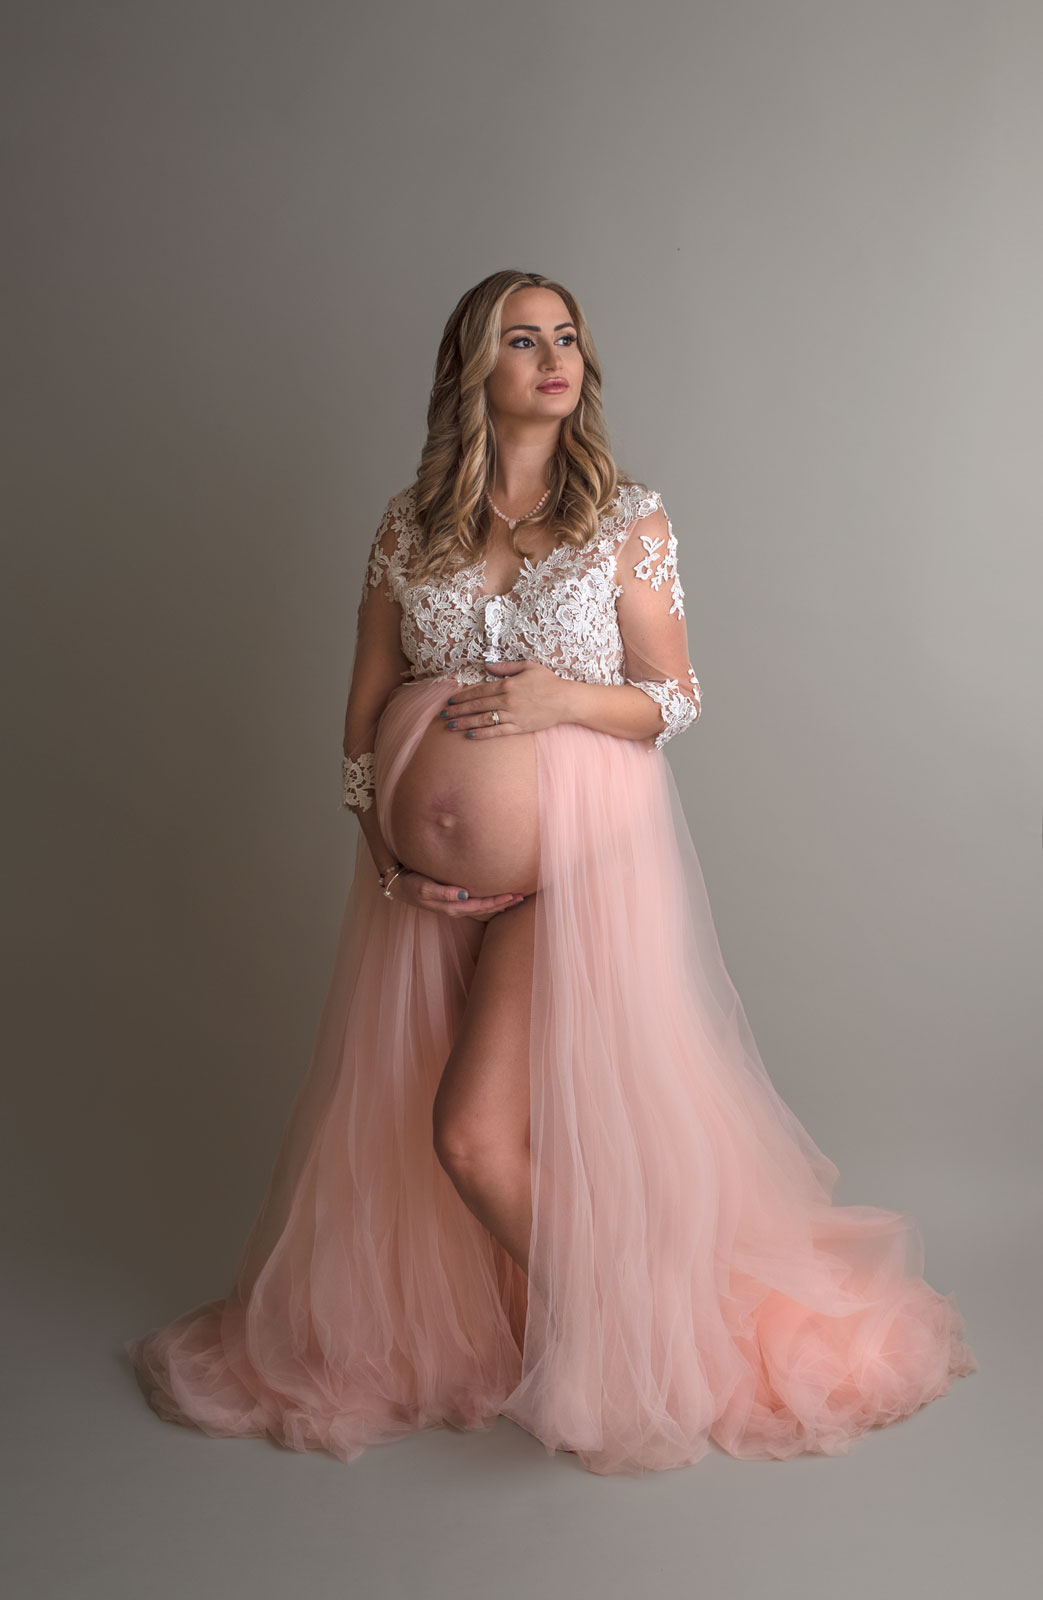 mom to be in white lace top and pink skirt holding her bump St Louis Midwife